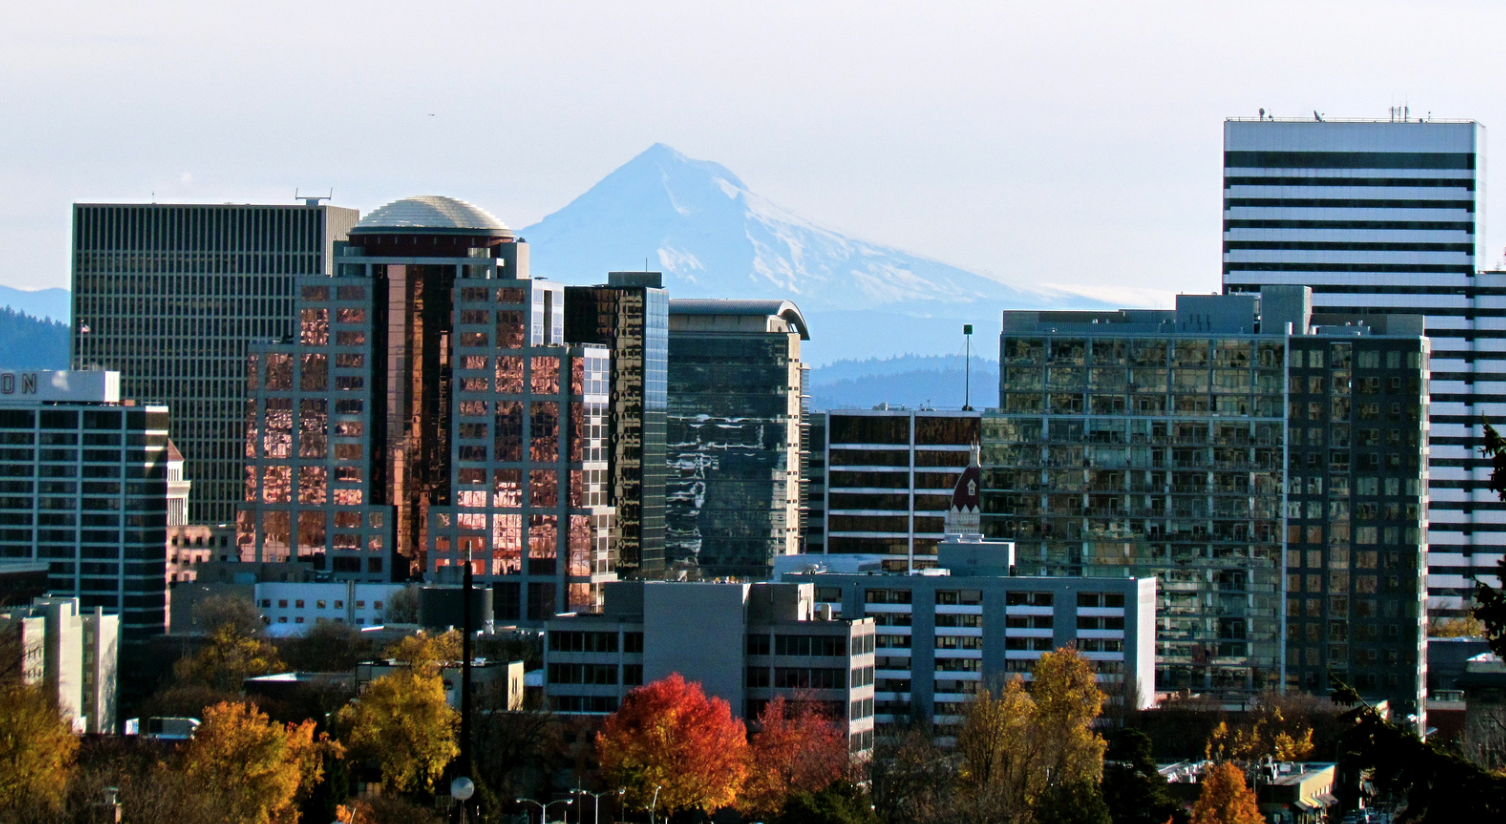 Portland buildings with mountain in background